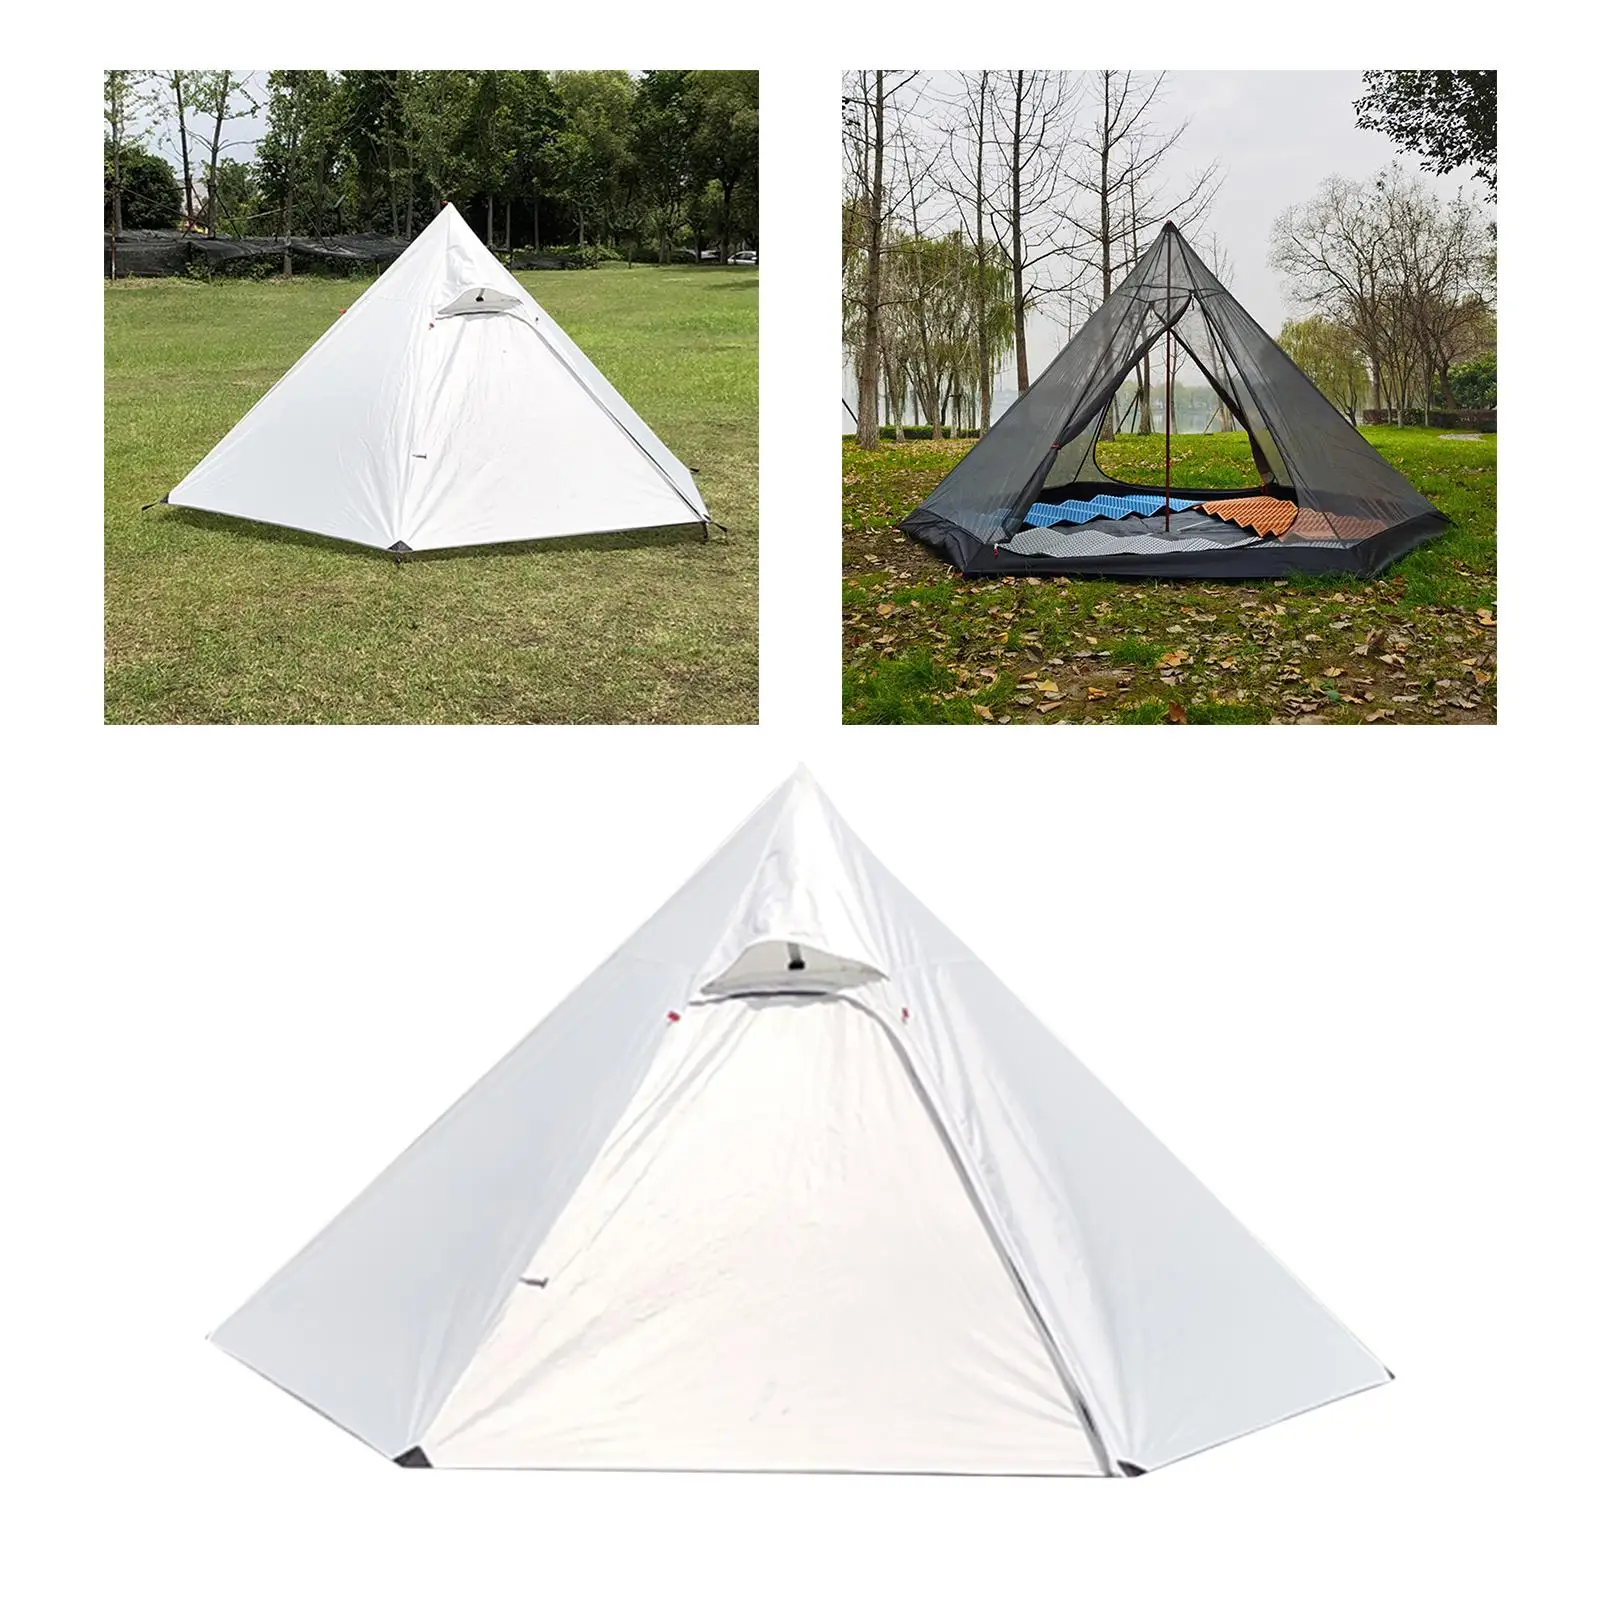 Pyramid Tent Waterproof Camping Teepee Ripstop 2-3 Person for Backpacking Hiking